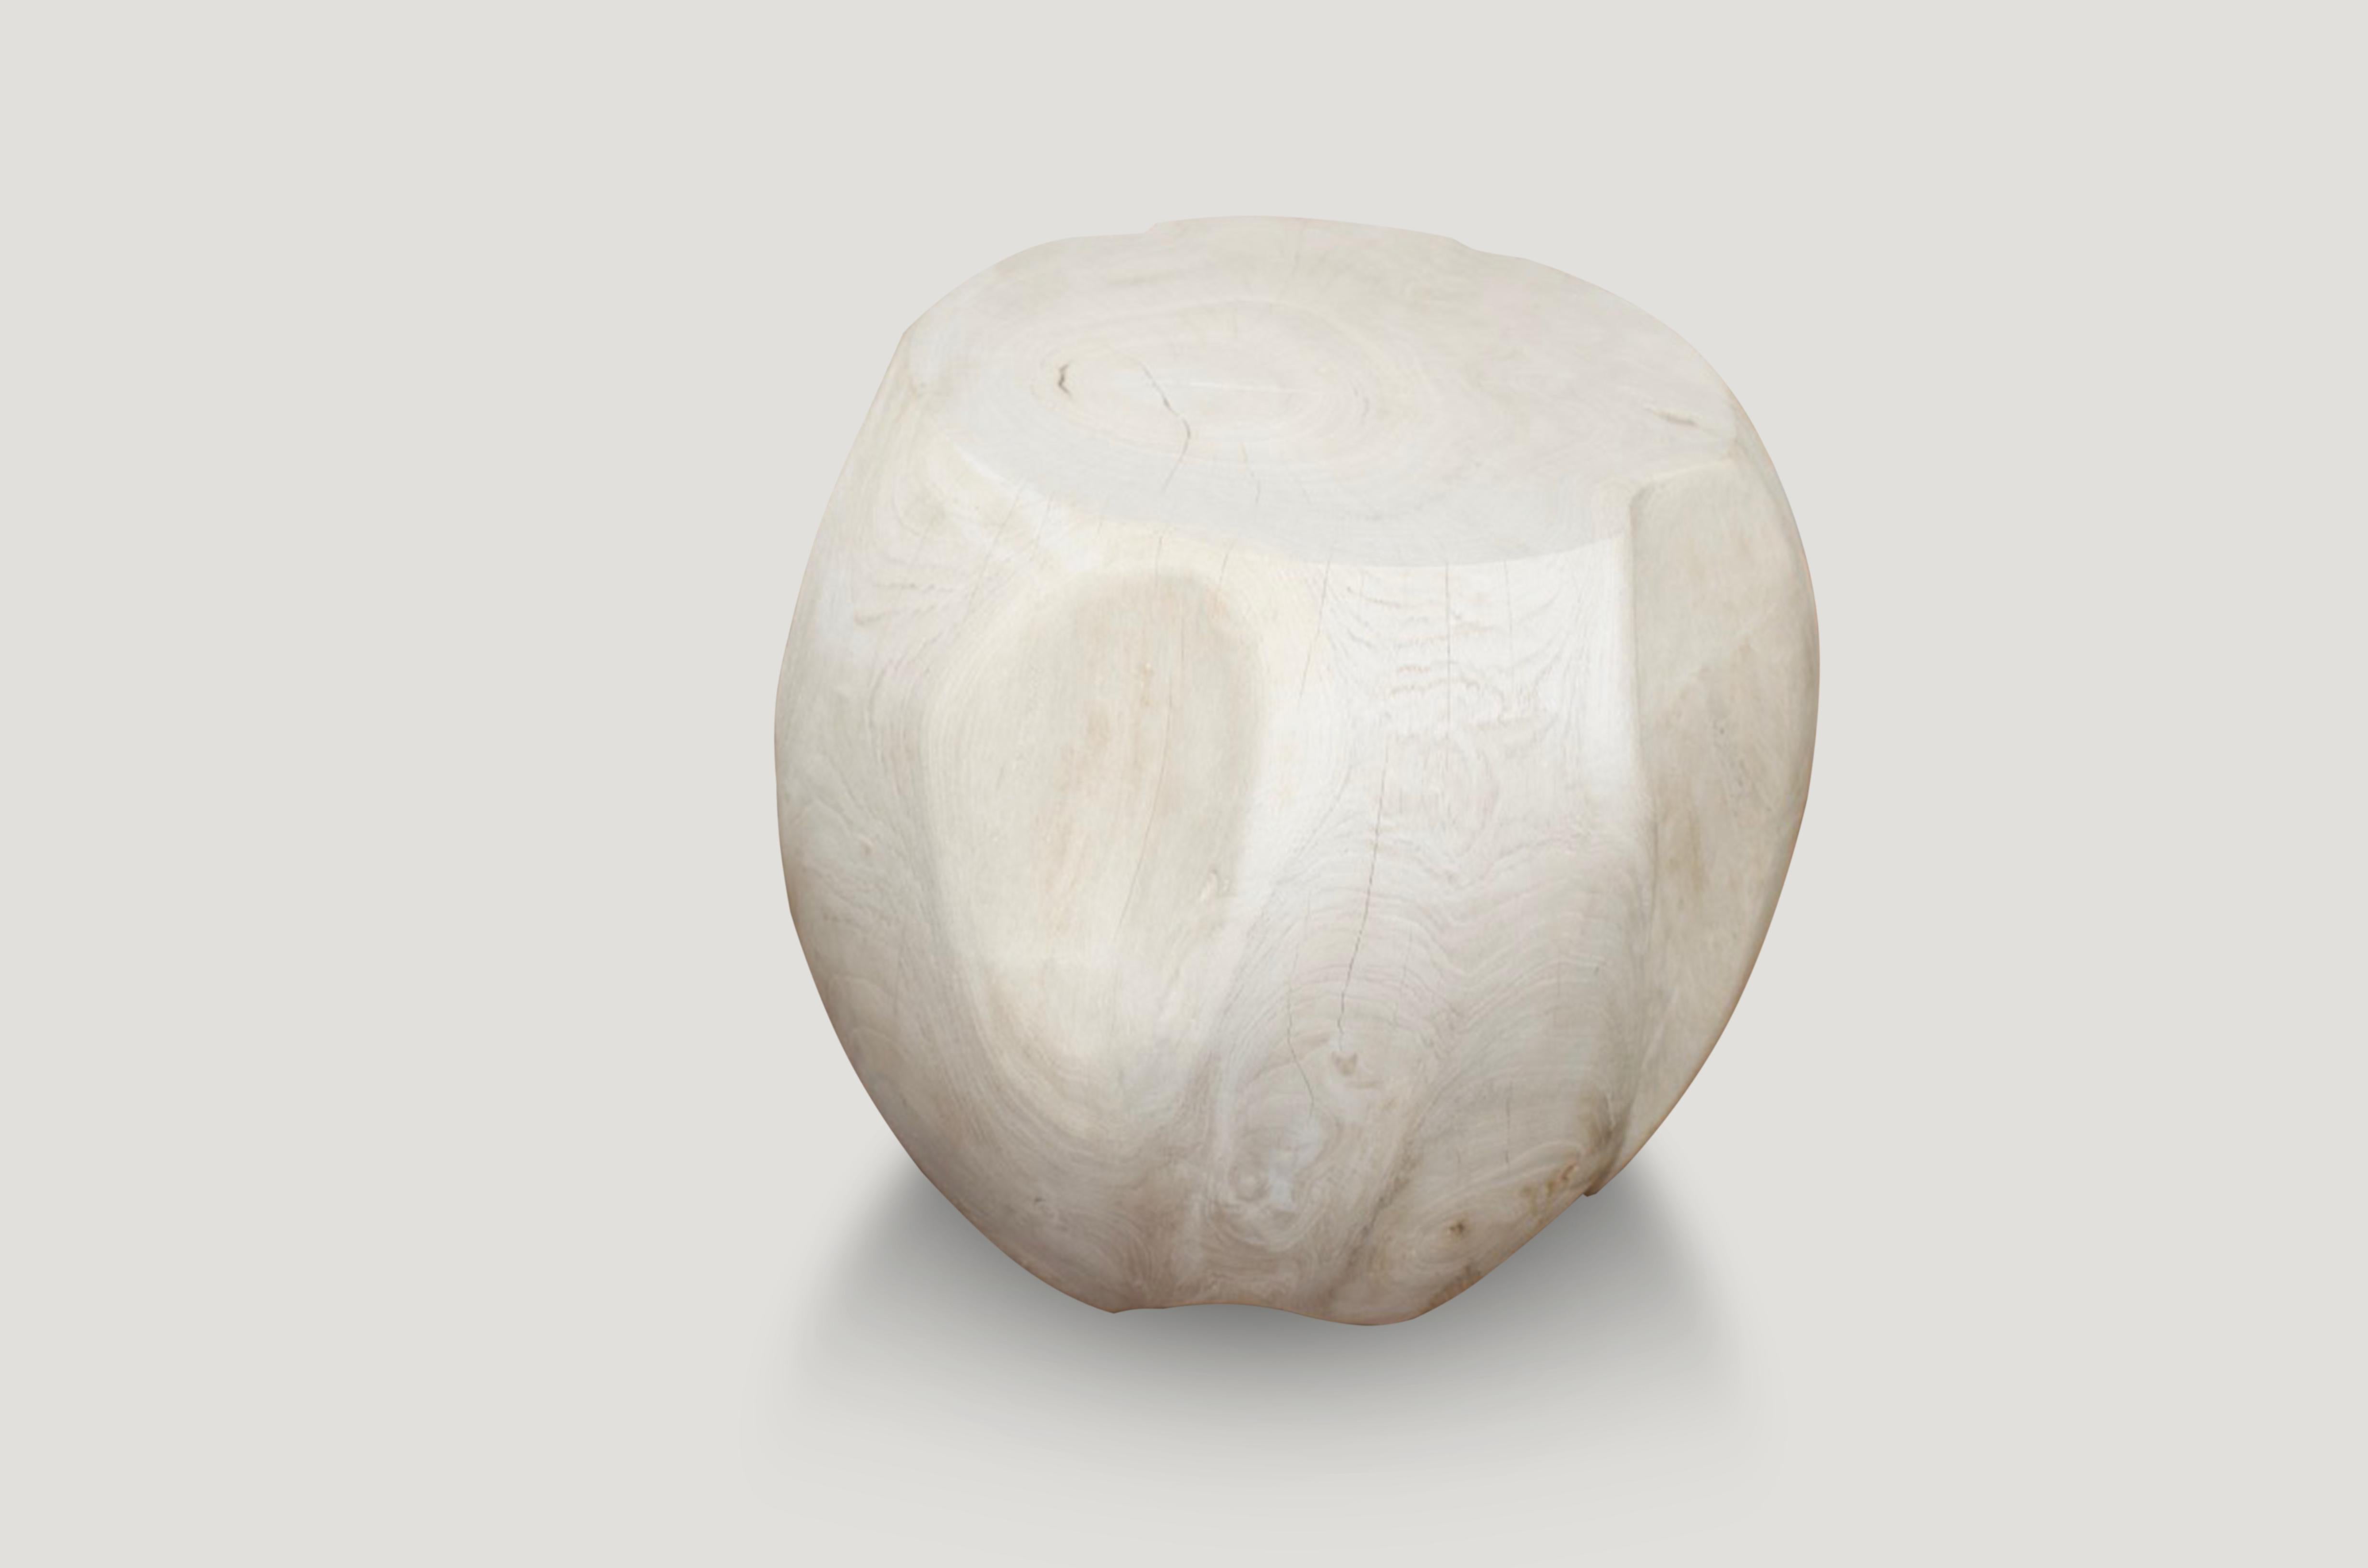 Reclaimed teak wood which we have hand carved into a drum shaped side table or stool and bleached. The top flat section is 12? Diameter and the outer drum shape expands to 15? Organic is the new modern.

The St. Barts collection features an